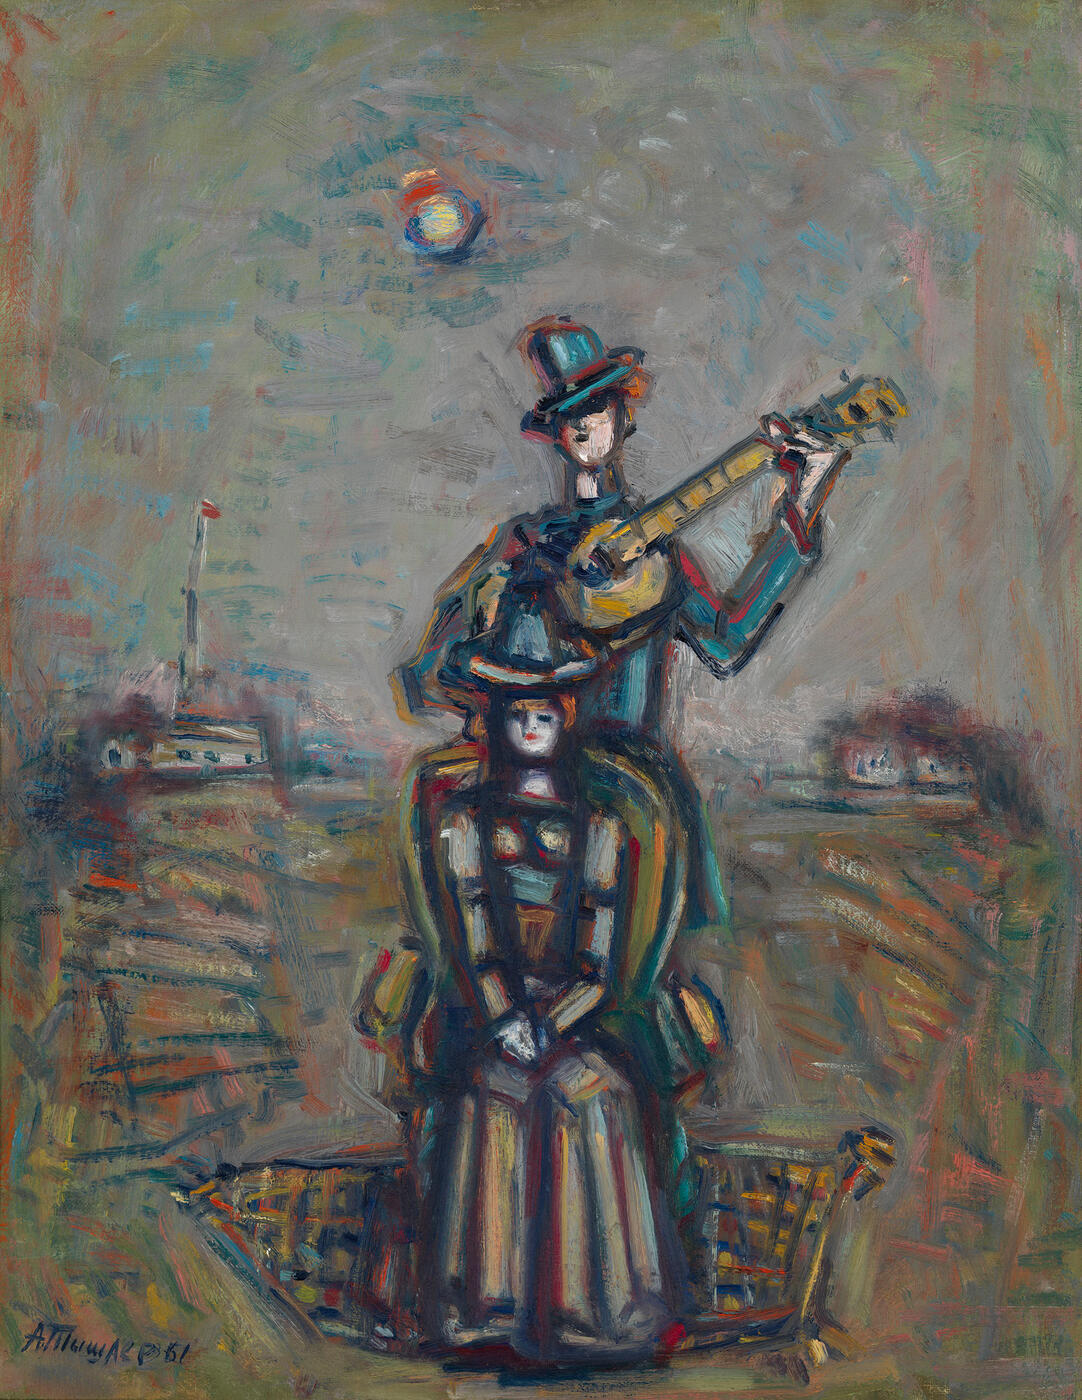 Fashionable Woman and Cavalier with Guitar